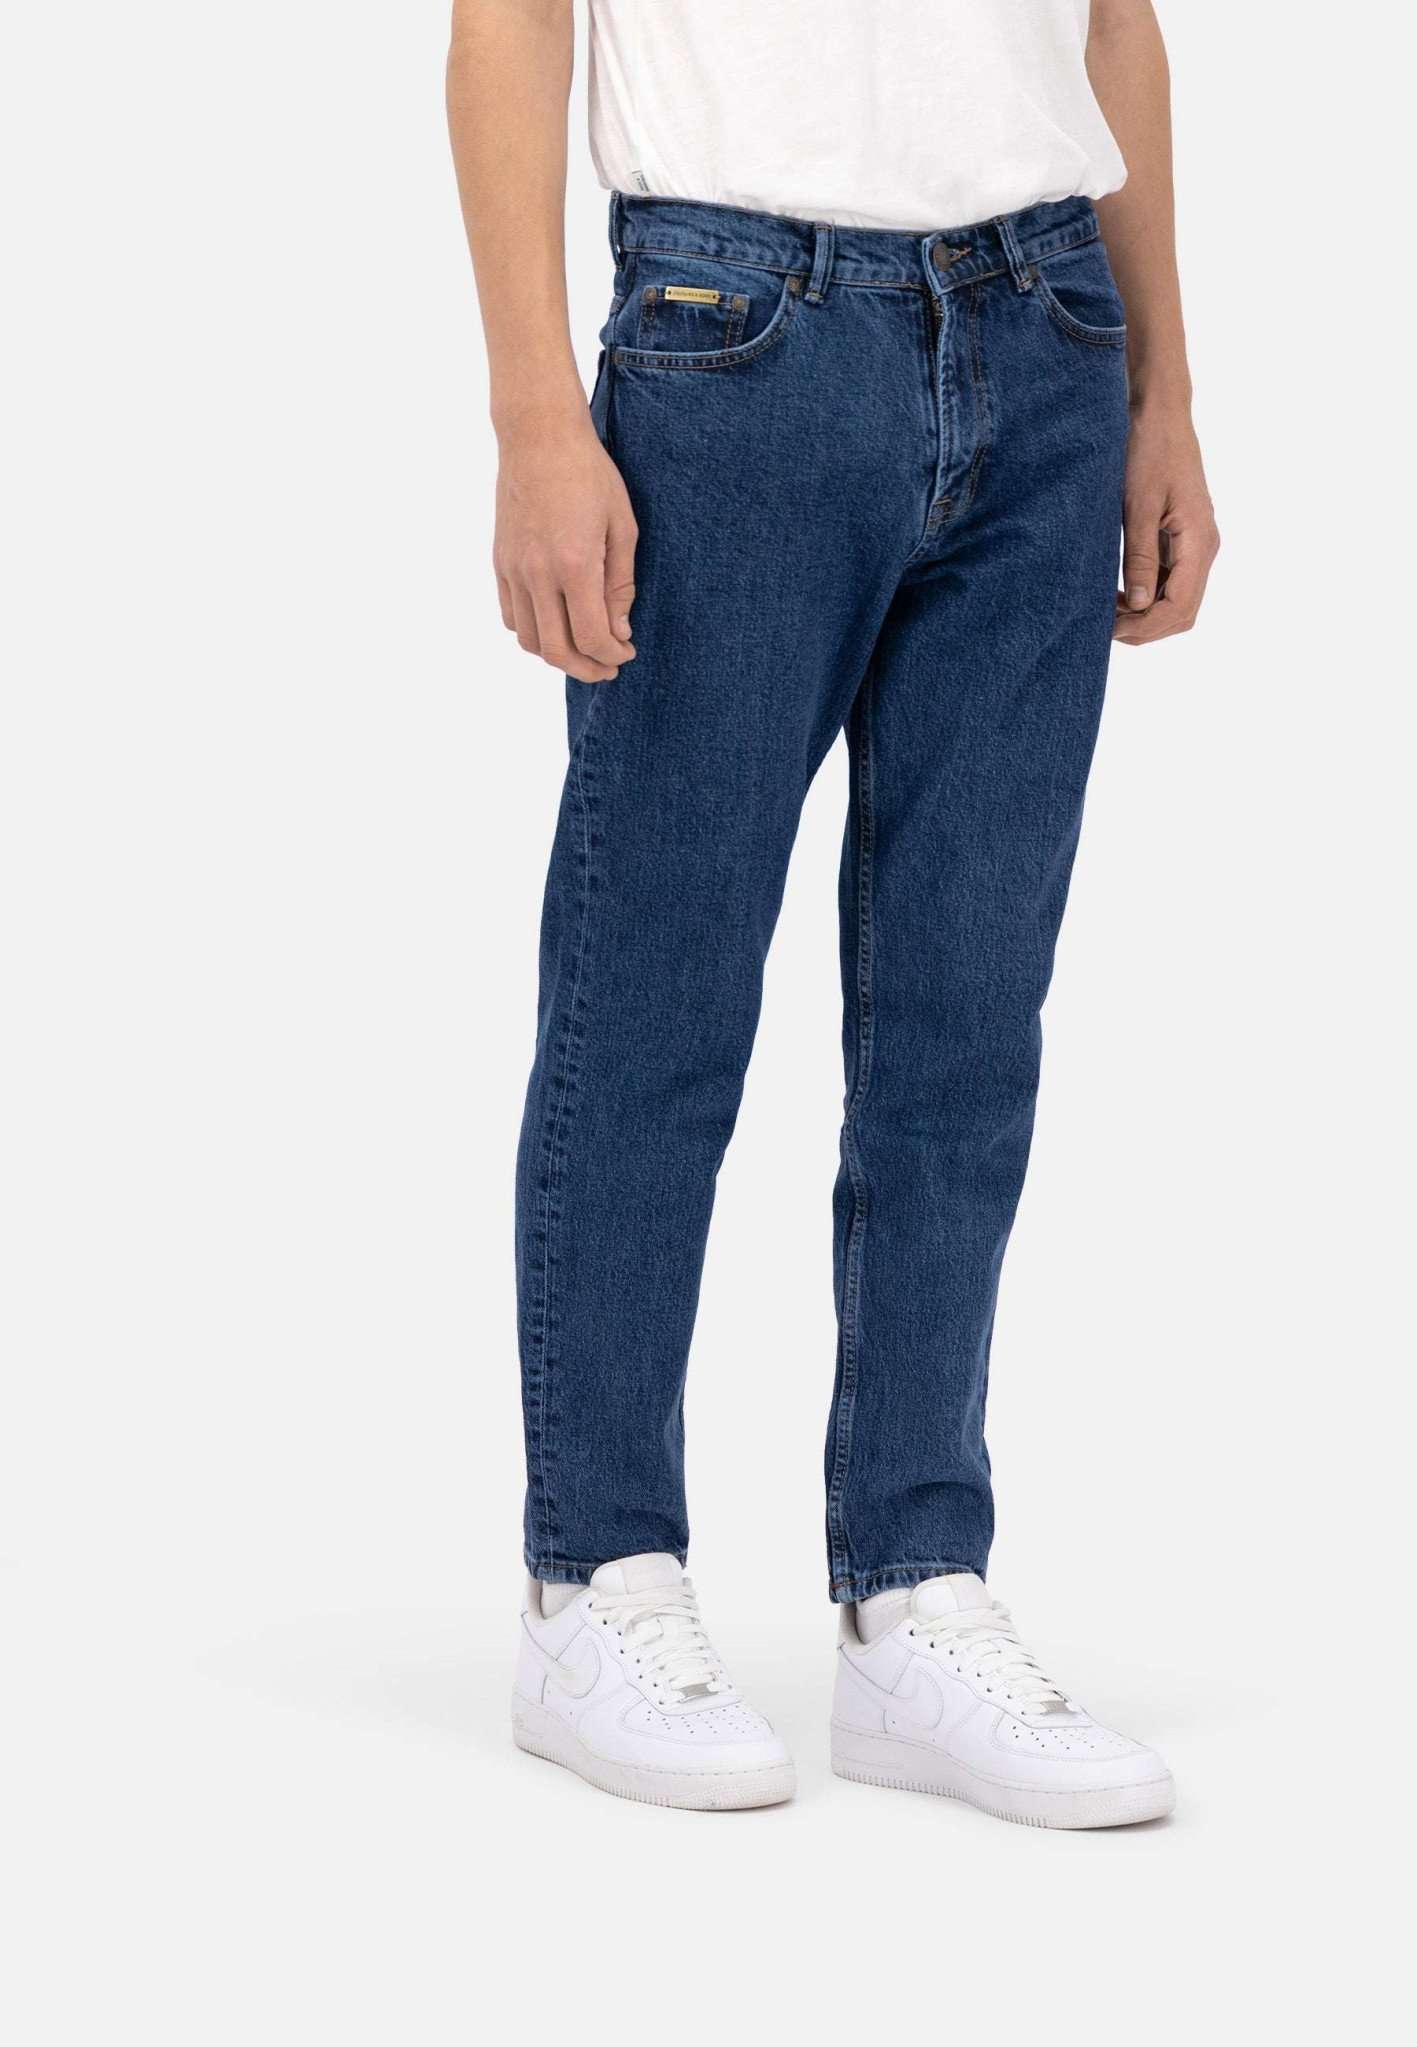 Denim Cropped in Dark Blue Jeans Colours and Sons   